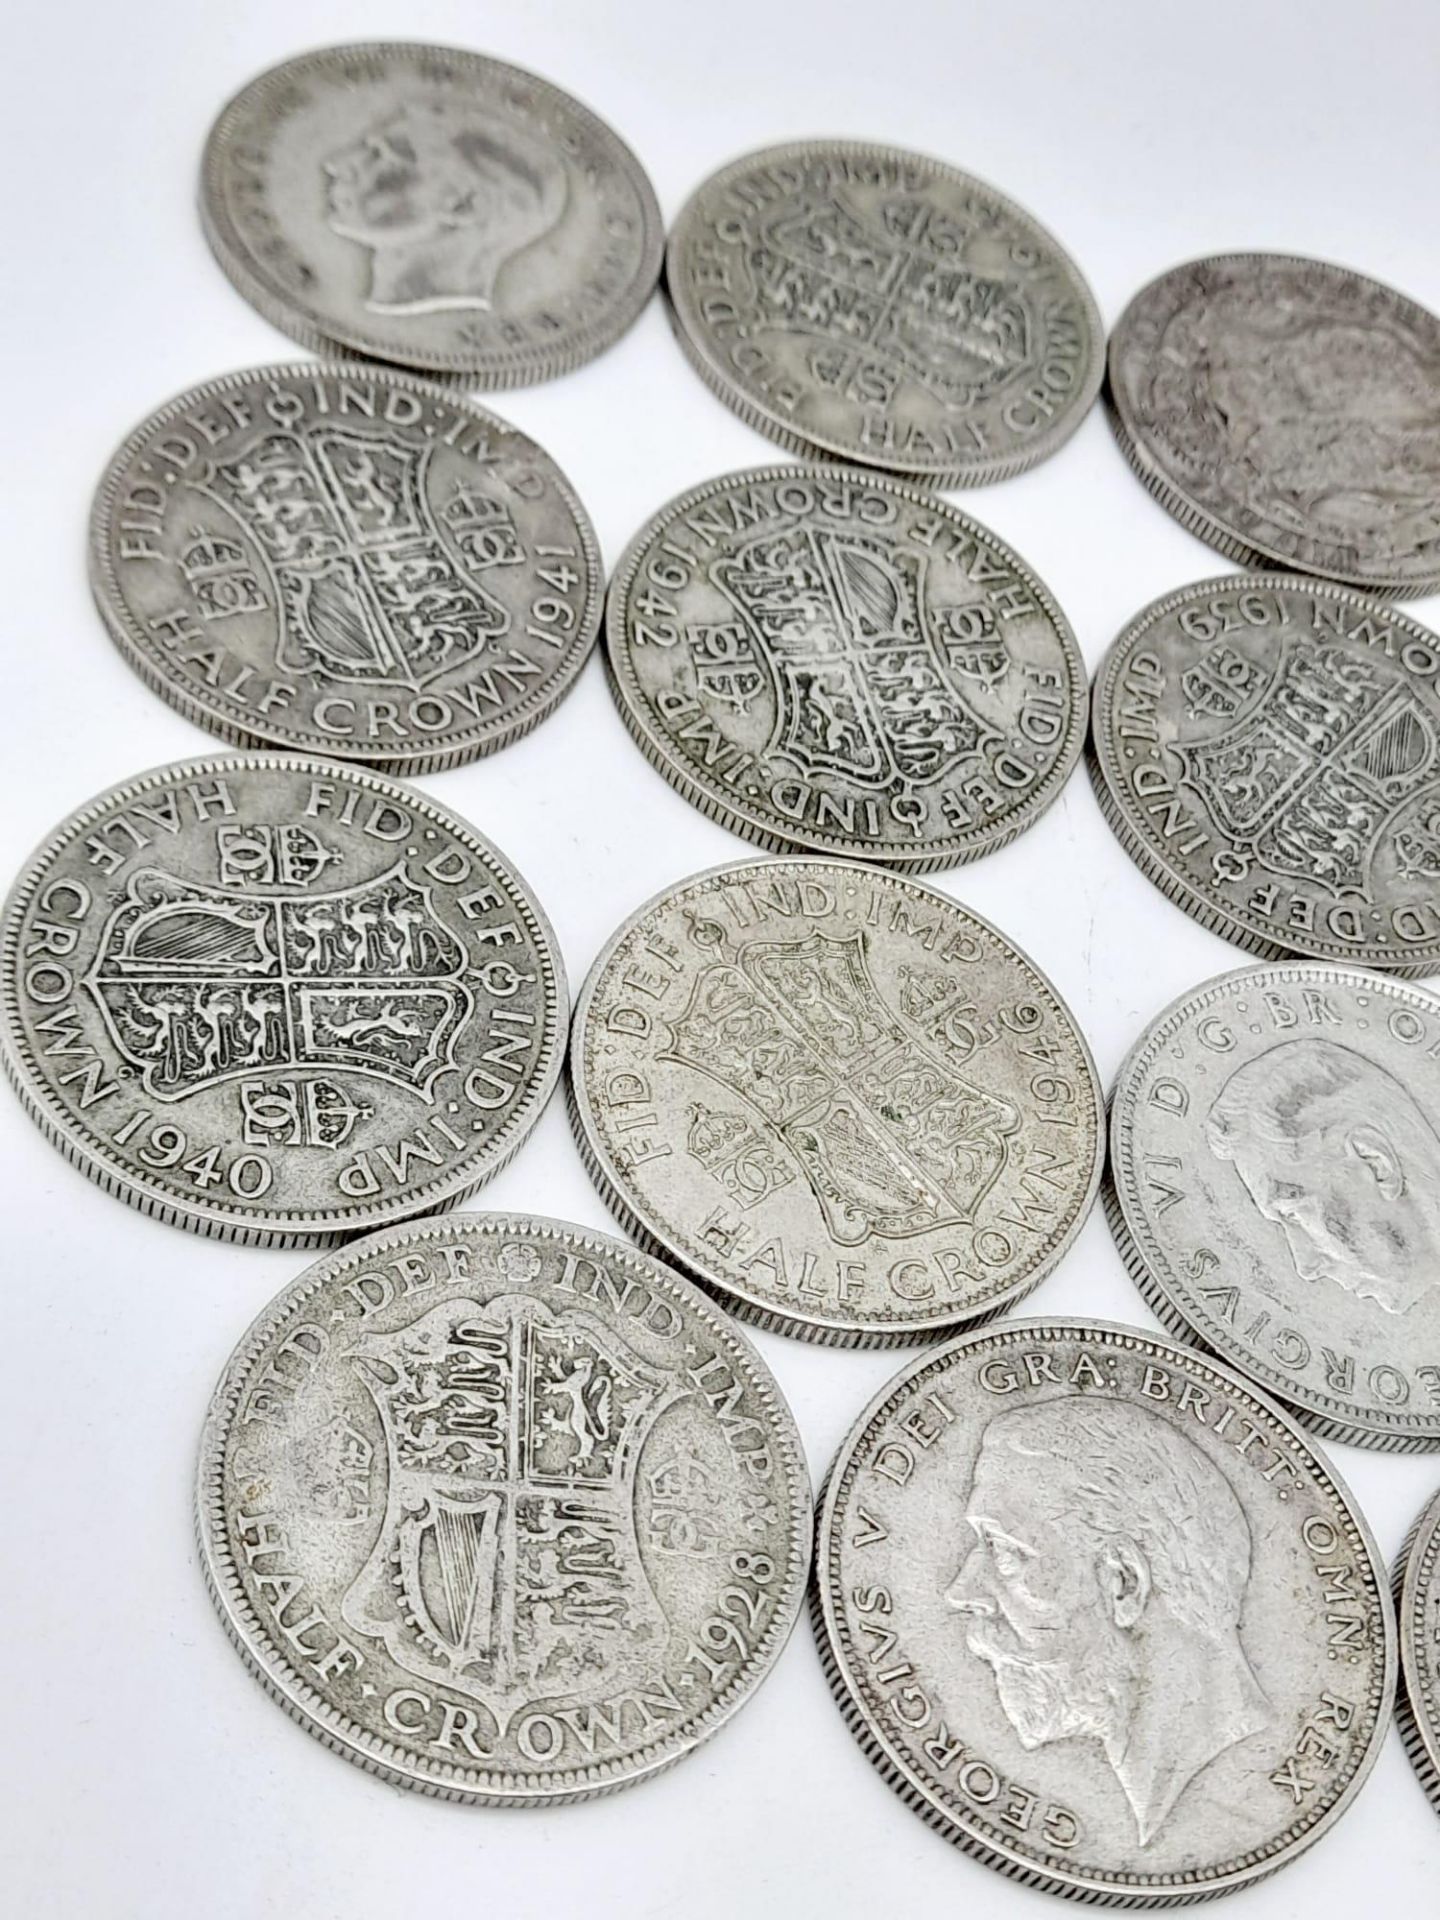 19 Pre 1947 British Silver Half Crown Coins. 265g total weight. - Image 2 of 5